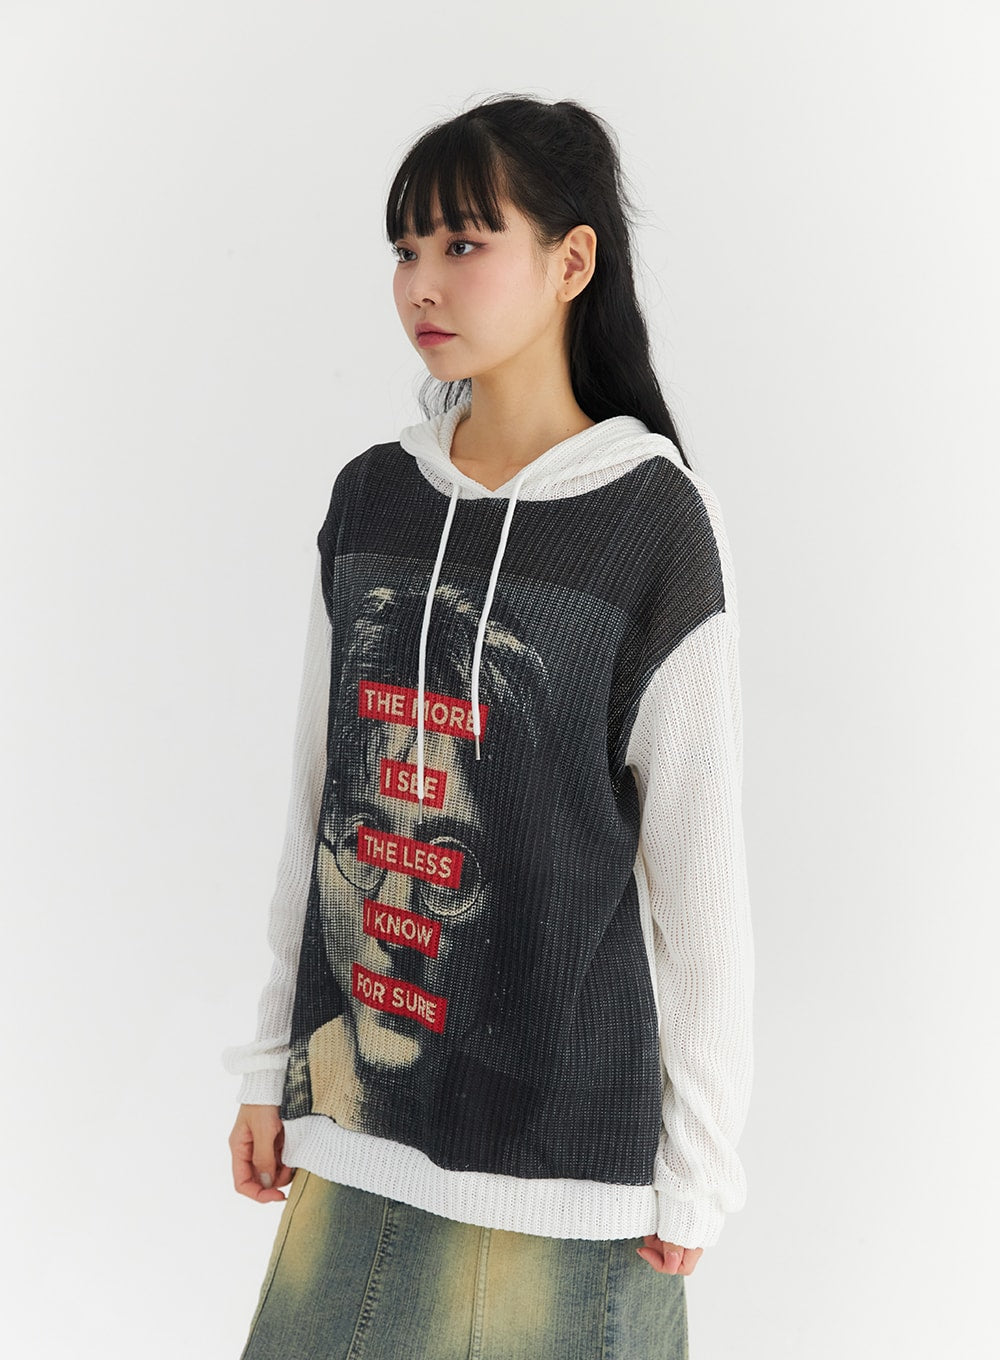 oversized-graphic-hoodie-co327